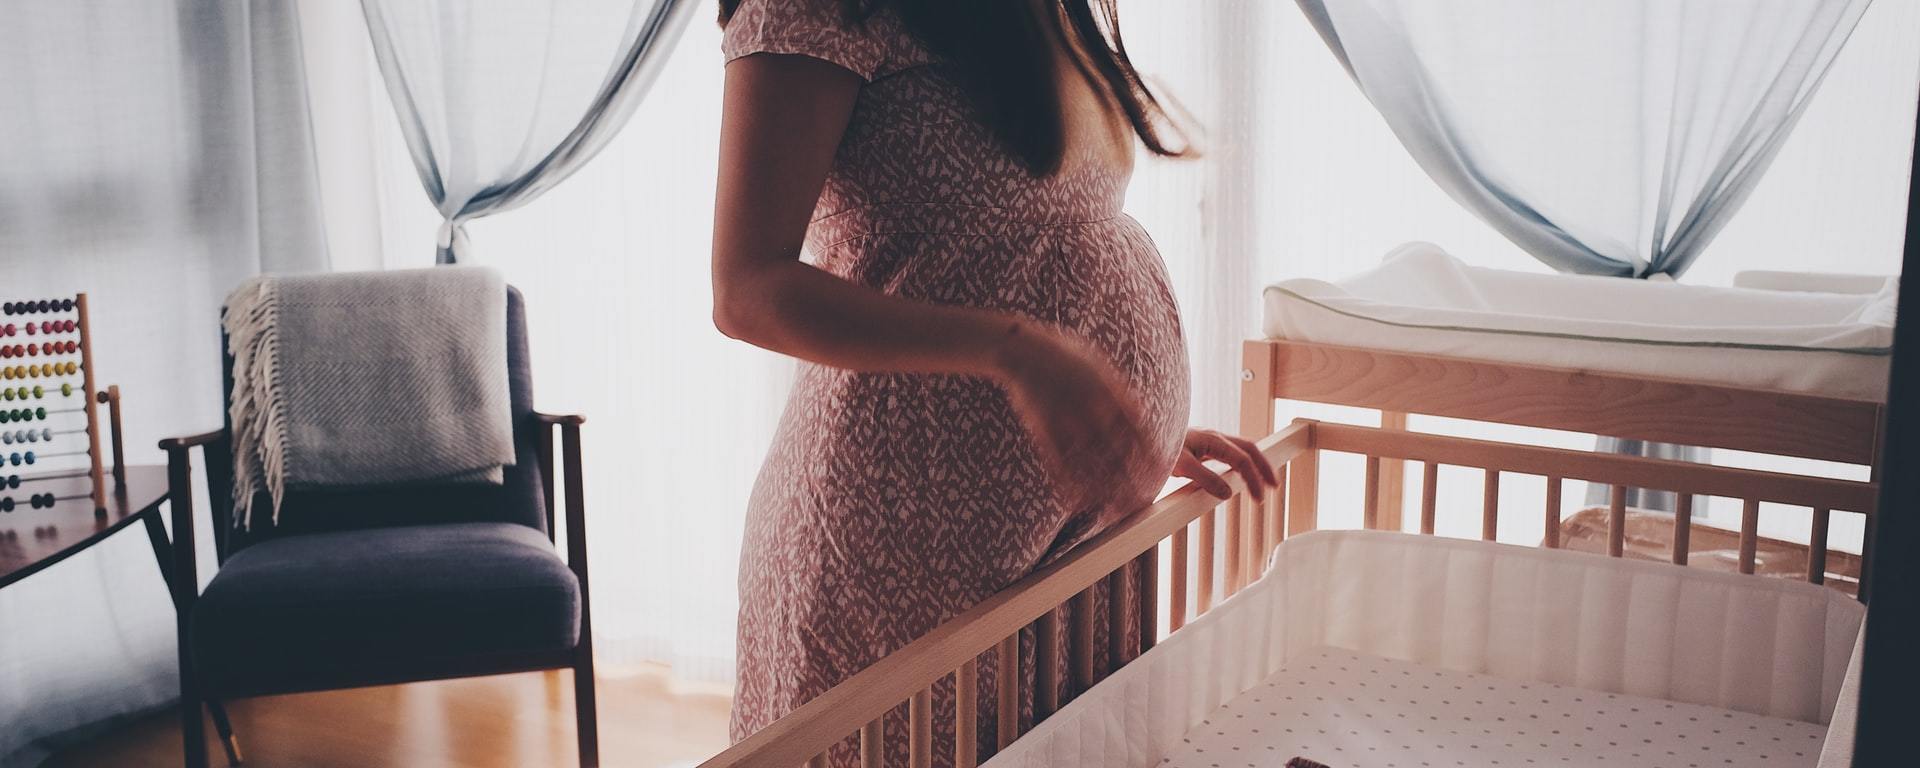 Why Am I Losing Weight During Pregnancy Without Morning Sickness - featured image